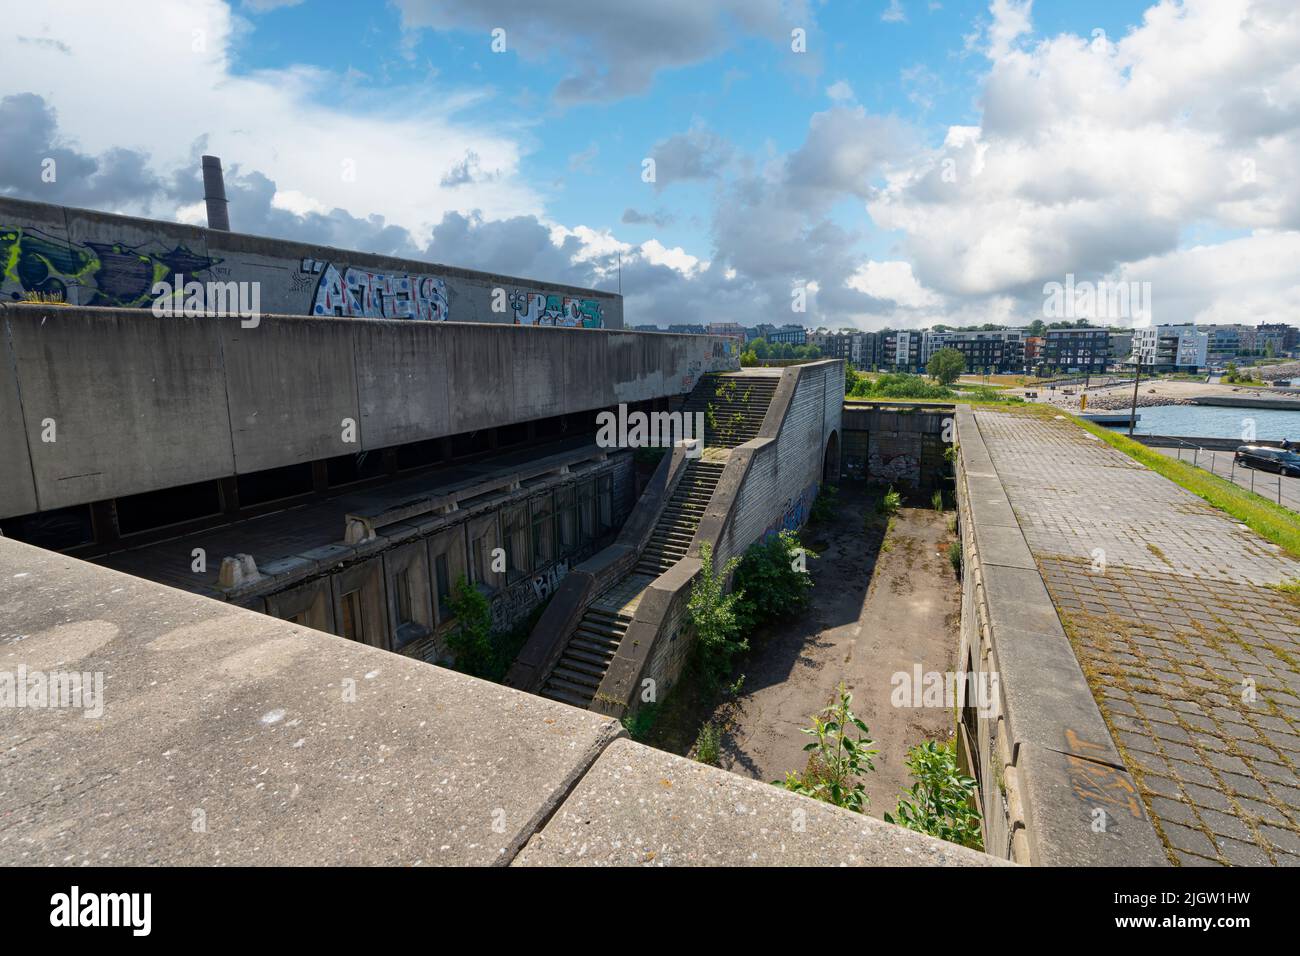 Tallinn, Estonia. July 2022.  View of Linnahall, a Soviet-era architectural structure built for the XXII Moscow Olympics which at the time was called Stock Photo